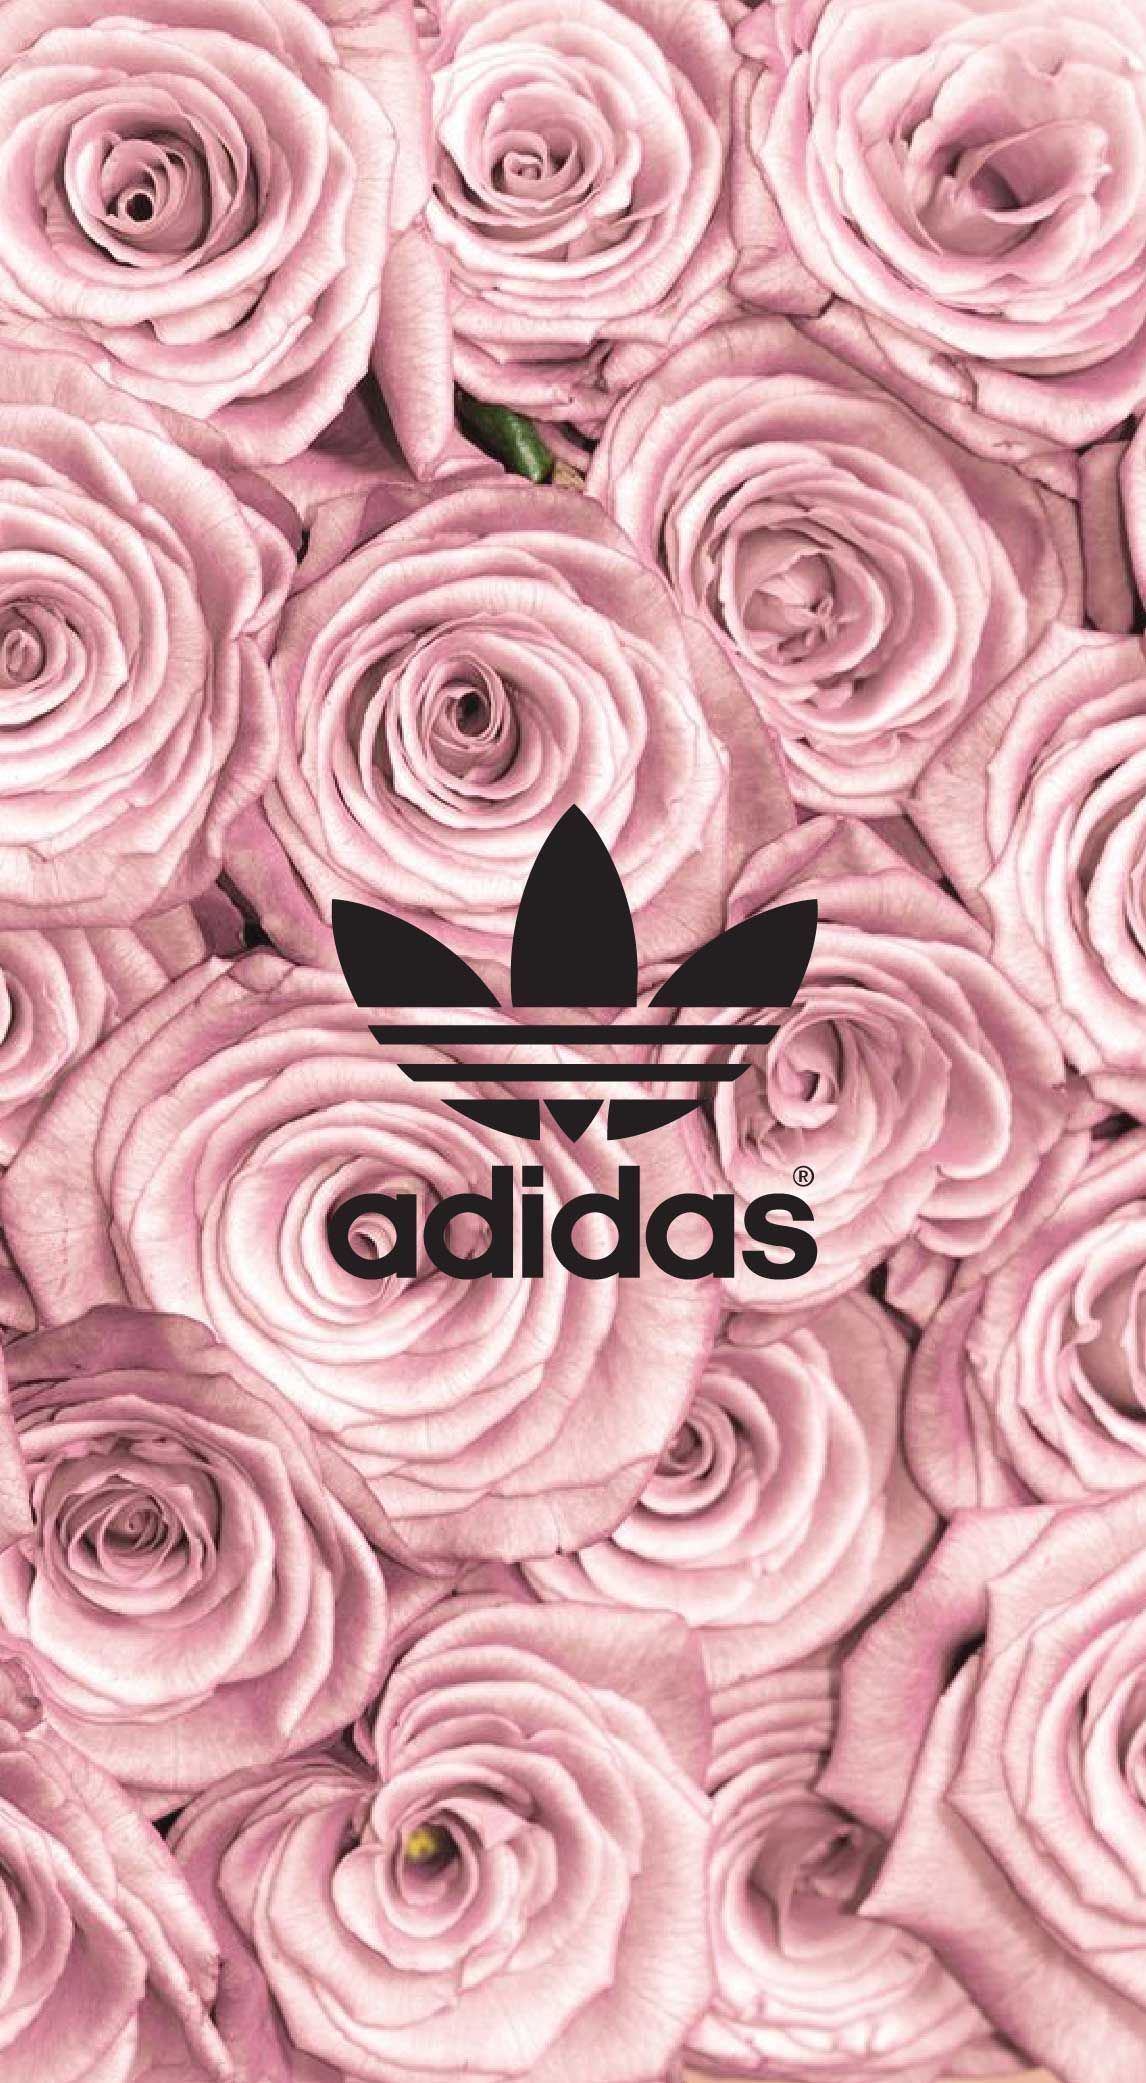 Adidas Rose Wallpapers on